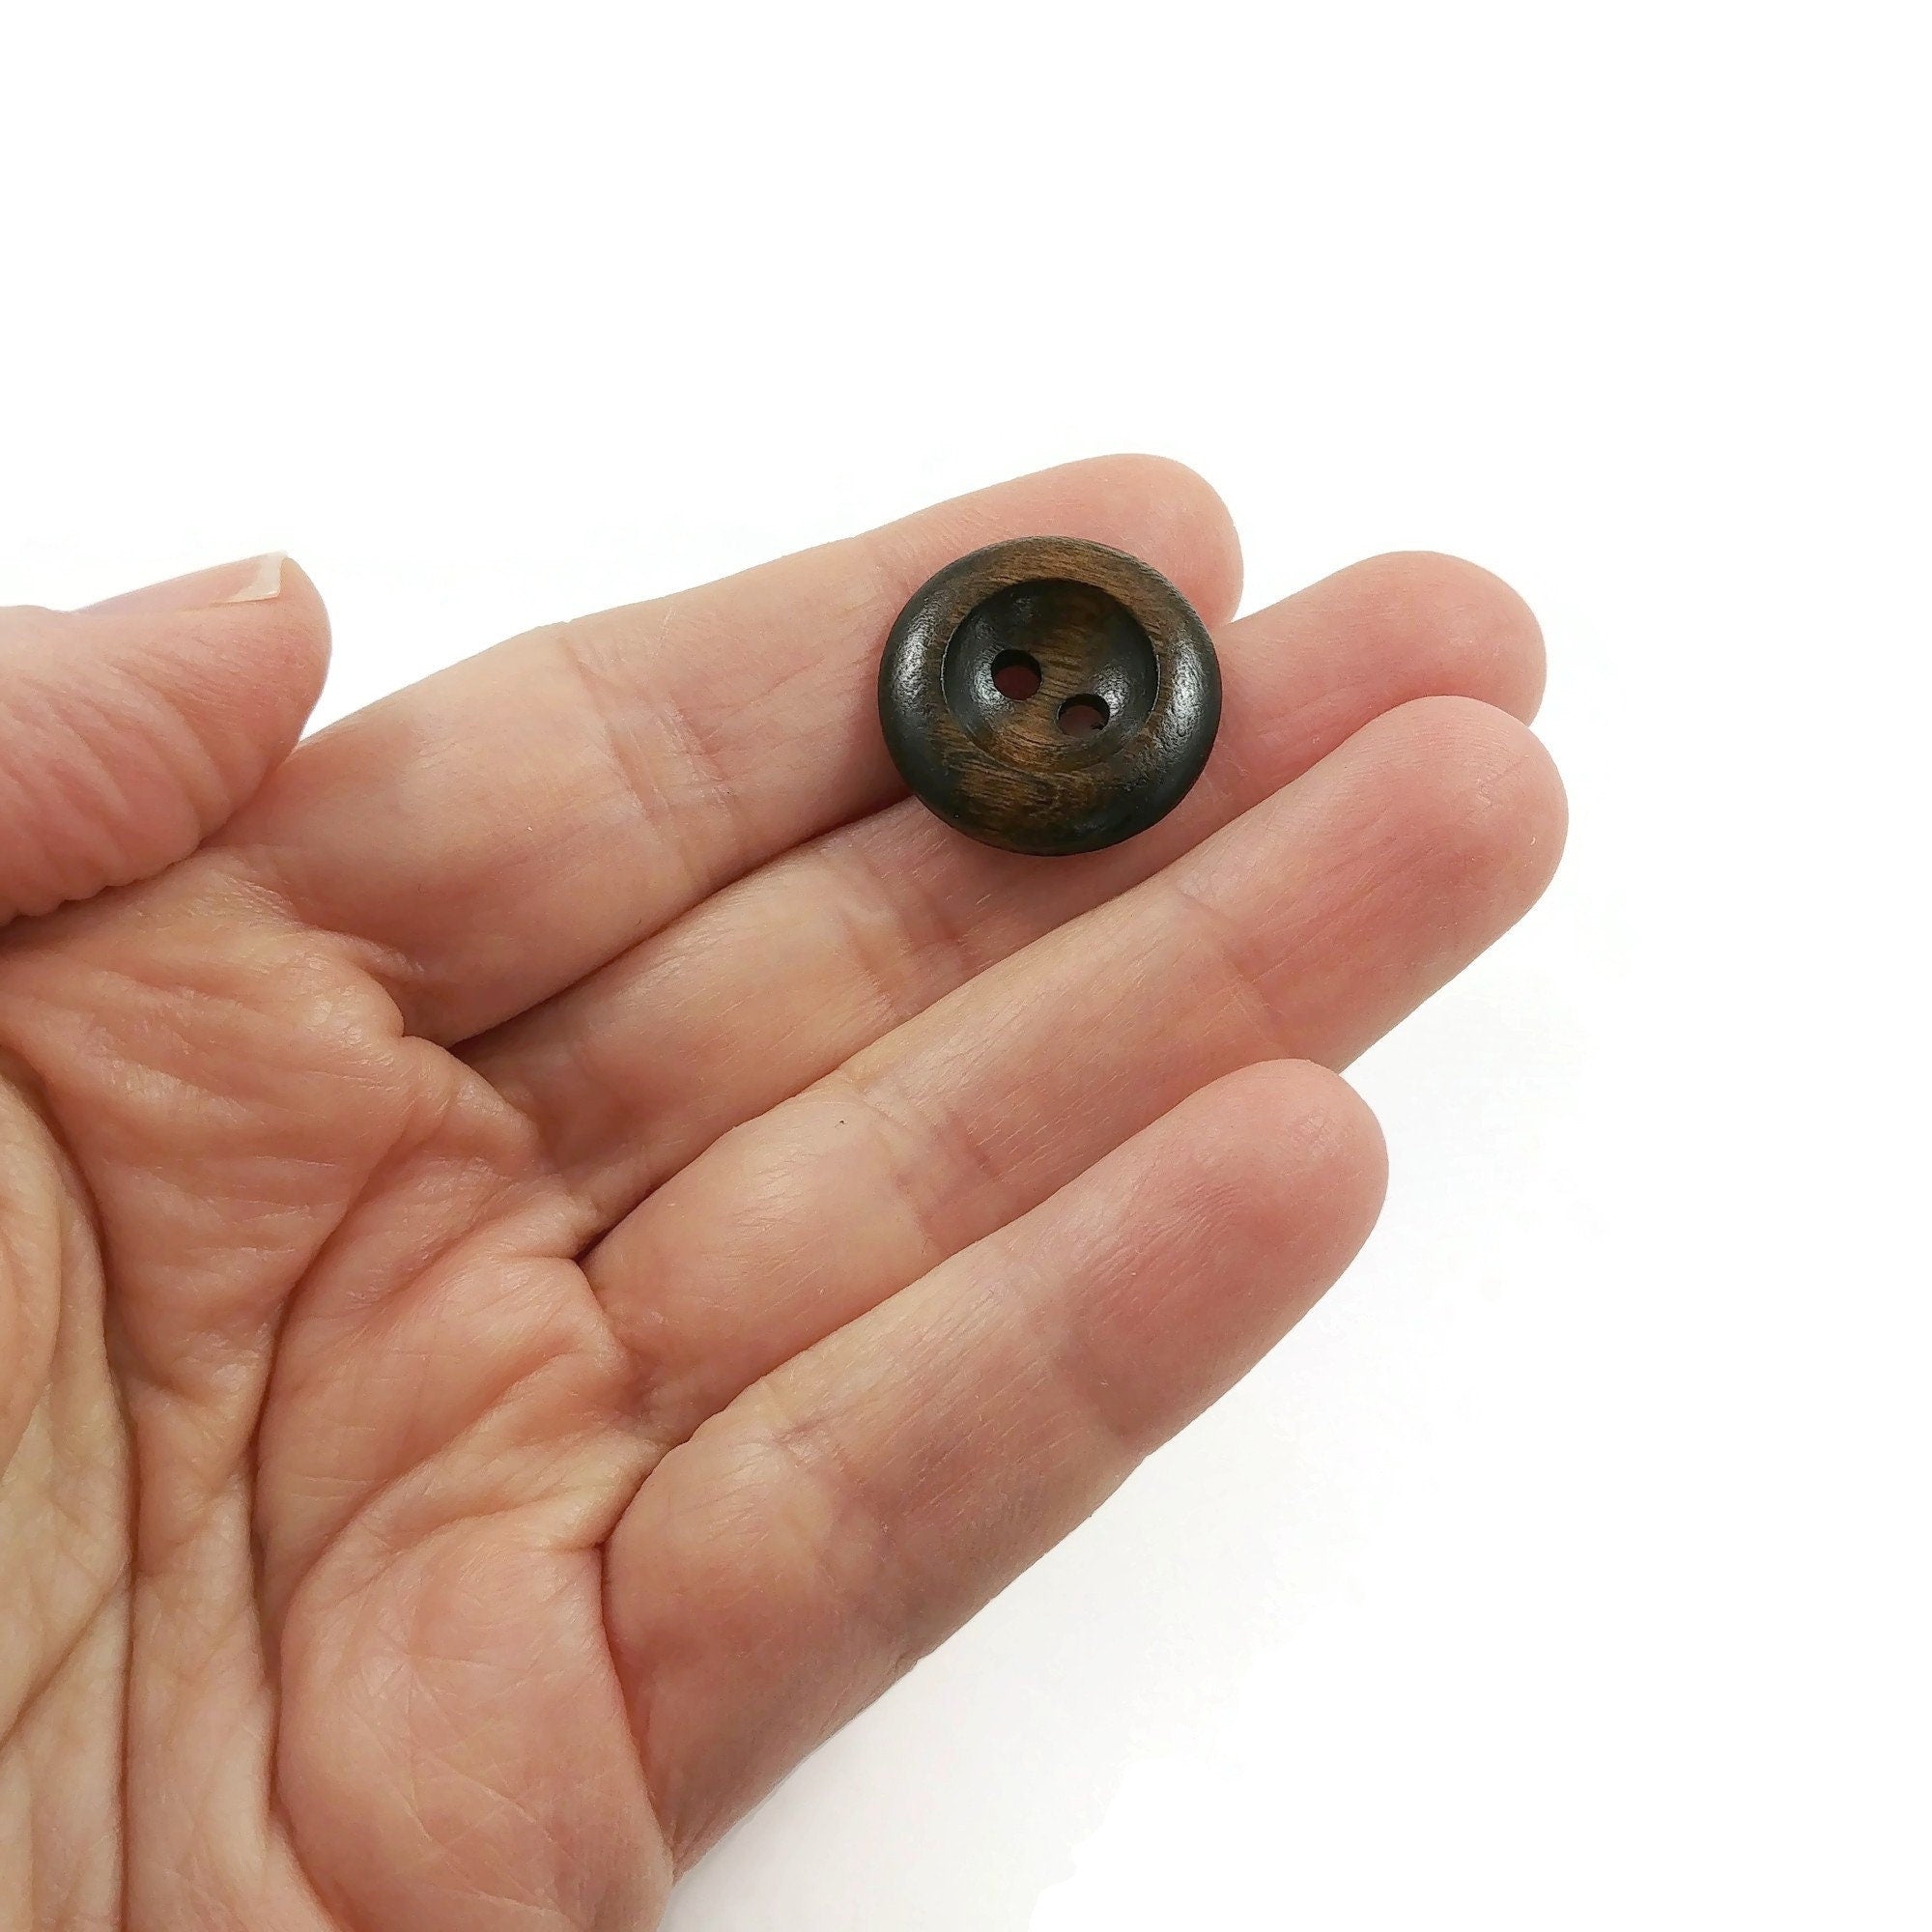 Round edge olive wooden buttons, 15mm, 18mm, 20mm, Made in Italy